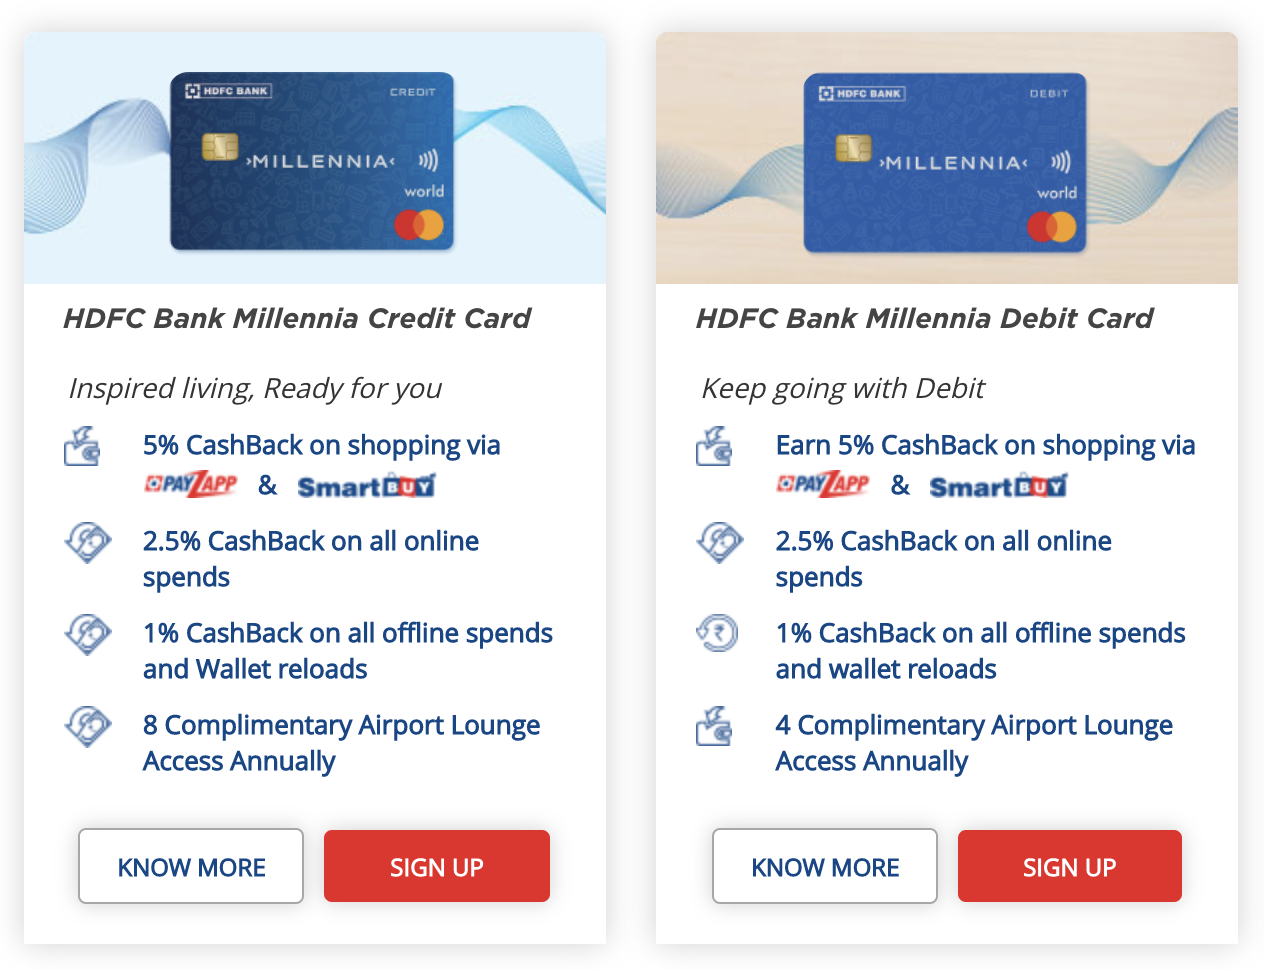 Hdfc Bank Launches Credit Debit Emi And Prepaid Cards For Millennials Cardexpert 2130